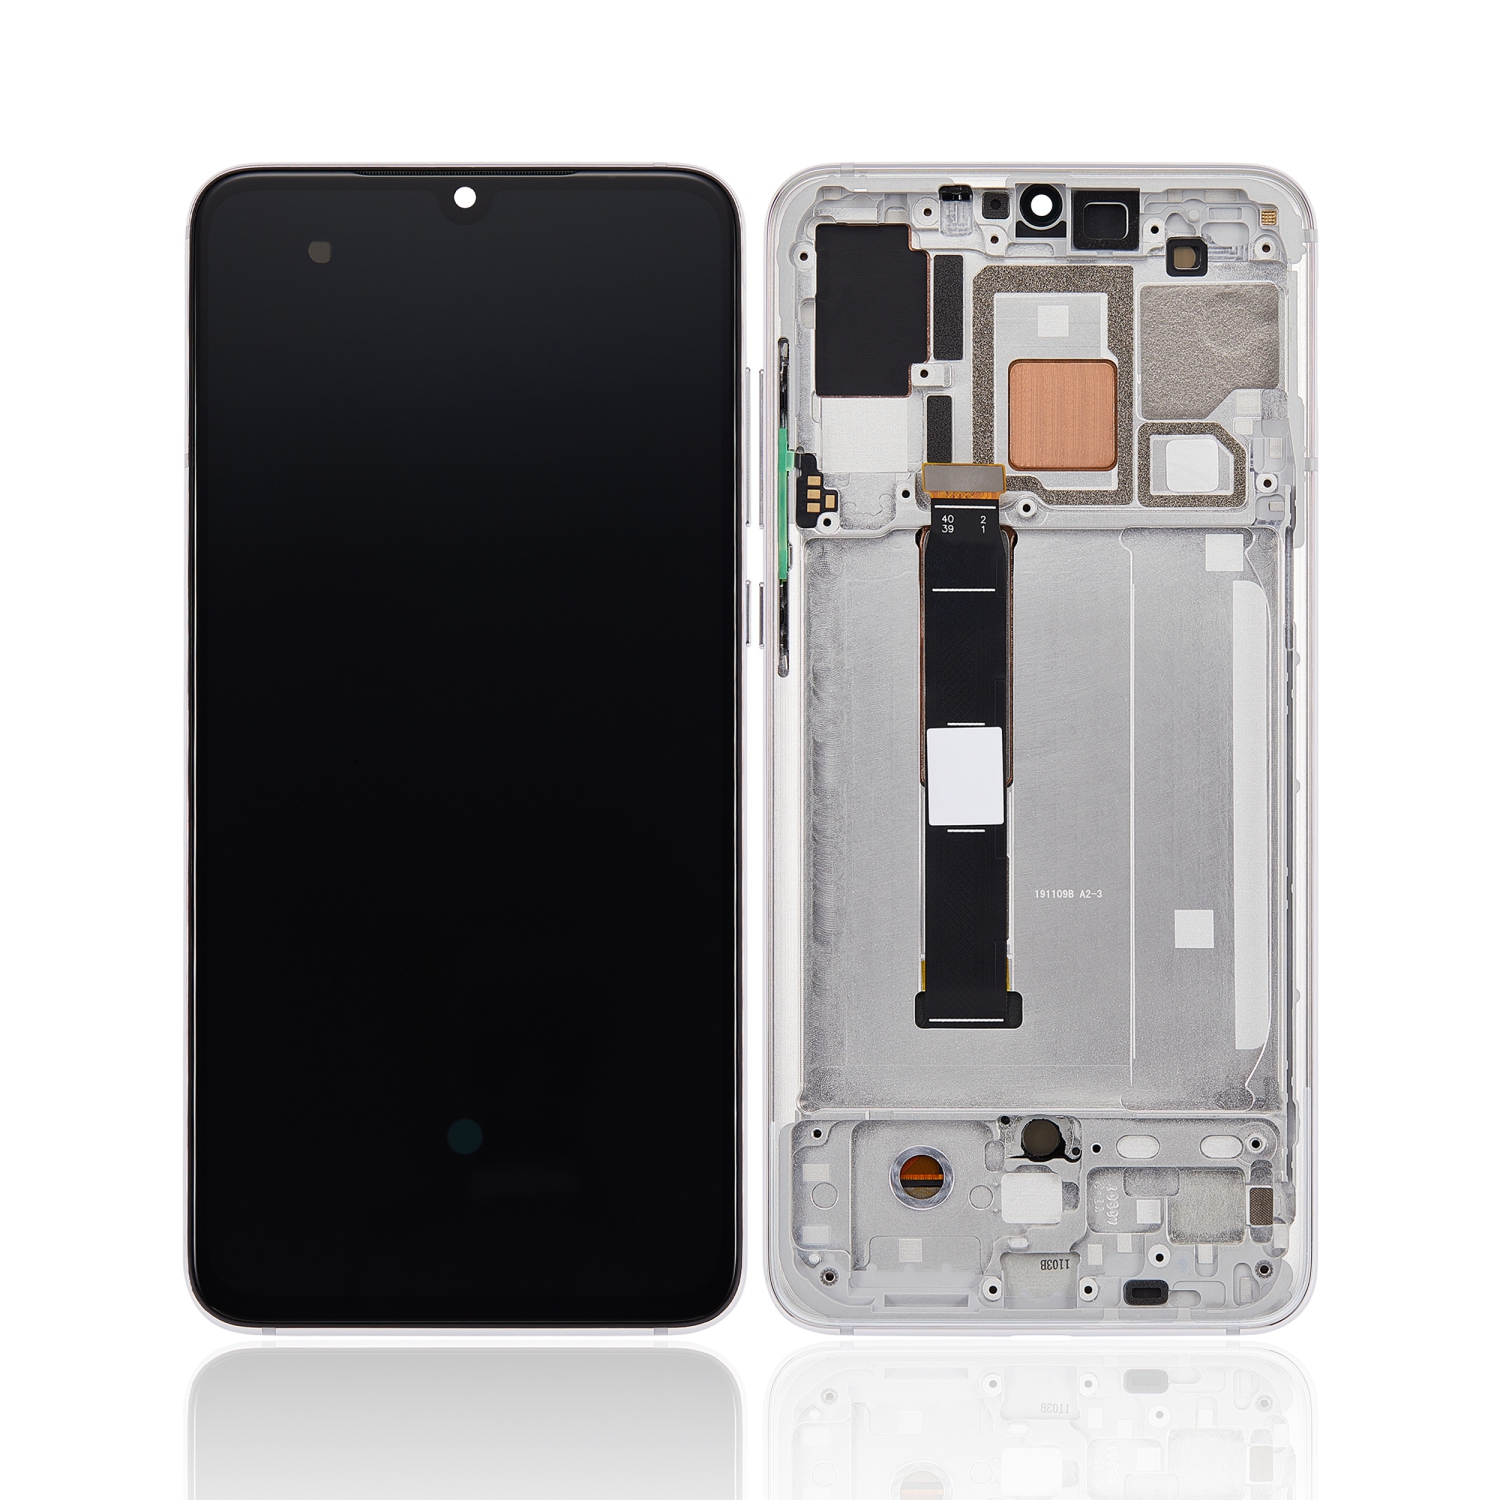 Refurbished (Excellent) - Replacement OLED Assembly With Frame Compatible With Xiaomi Mi 9 Pro (Dream White)